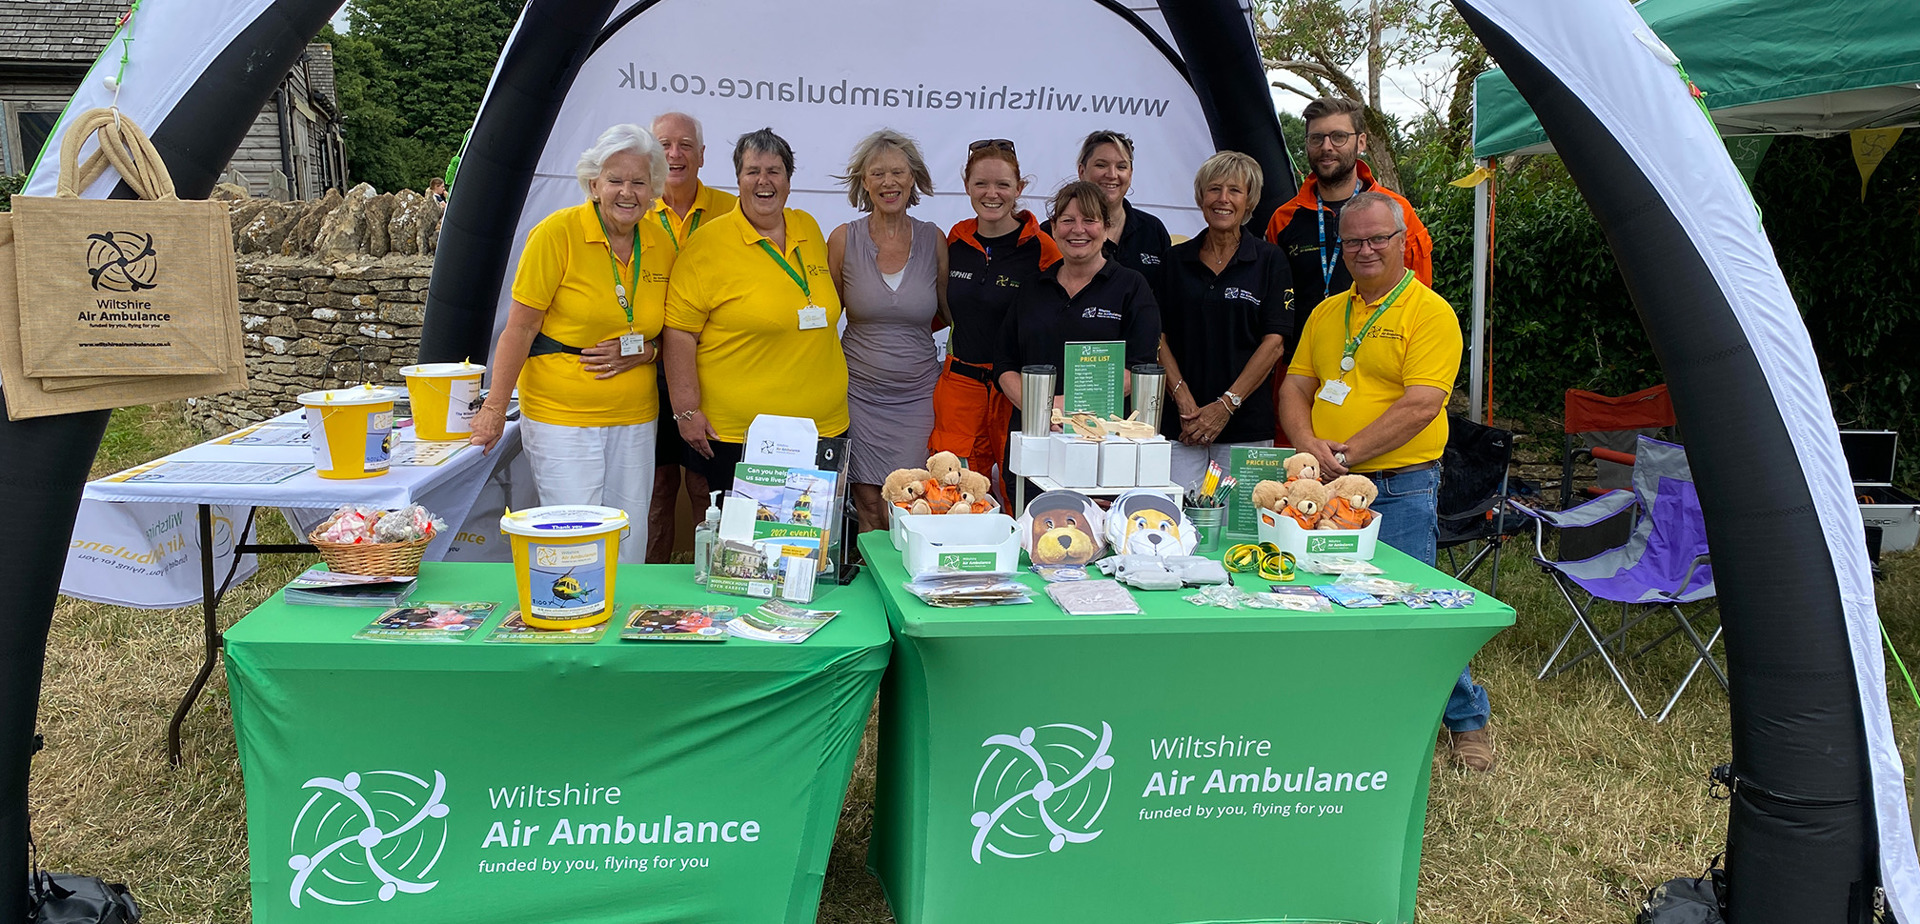 A group of volunteers, staff and aircrew at the Wiltshire Air Ambulance stall at Middlewick Open Gardens event